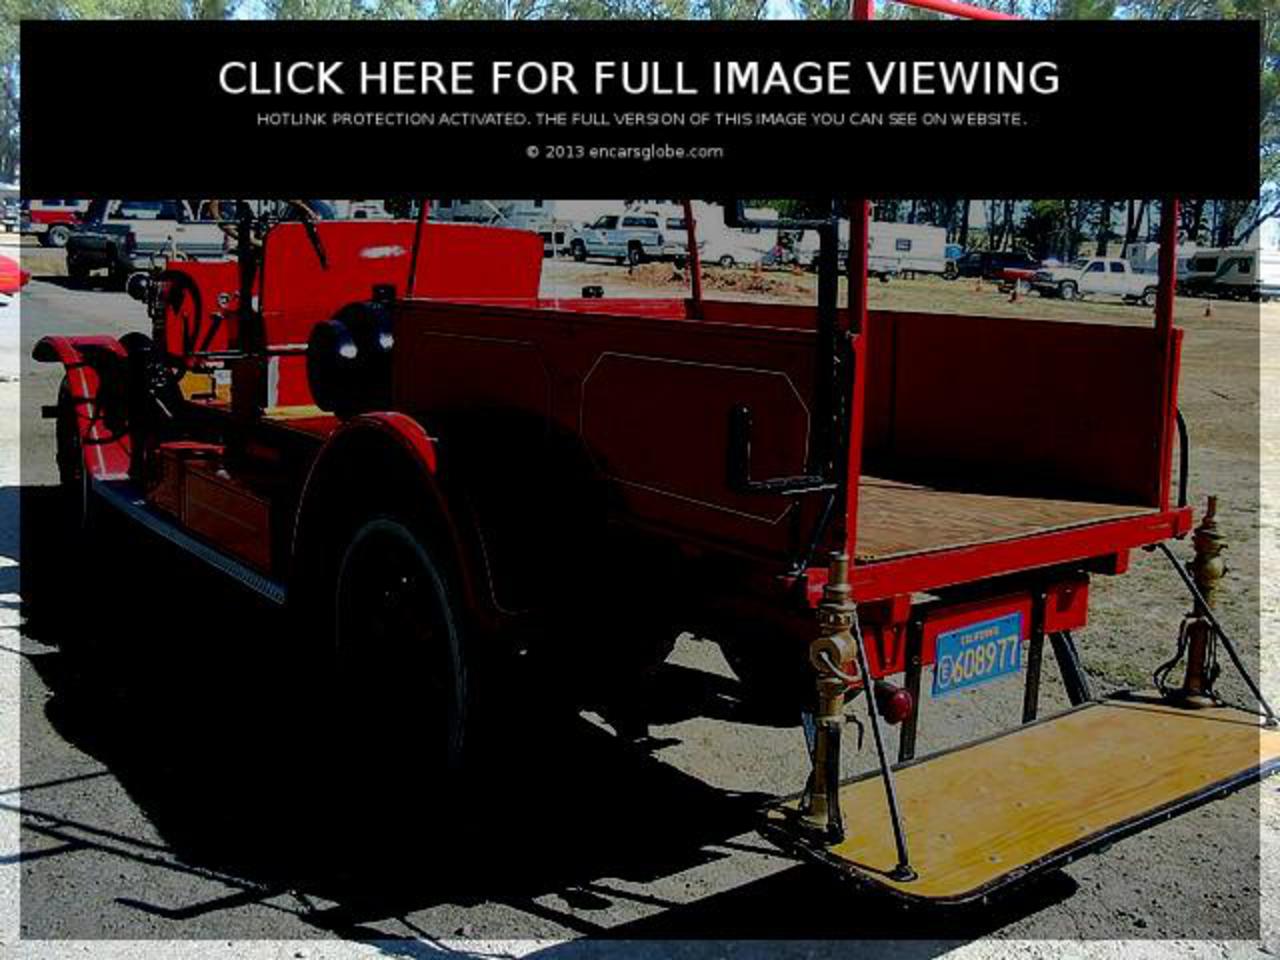 Moreland Model 19C 2 Ton Chassis Photo Gallery: Photo #06 out of 9 ...